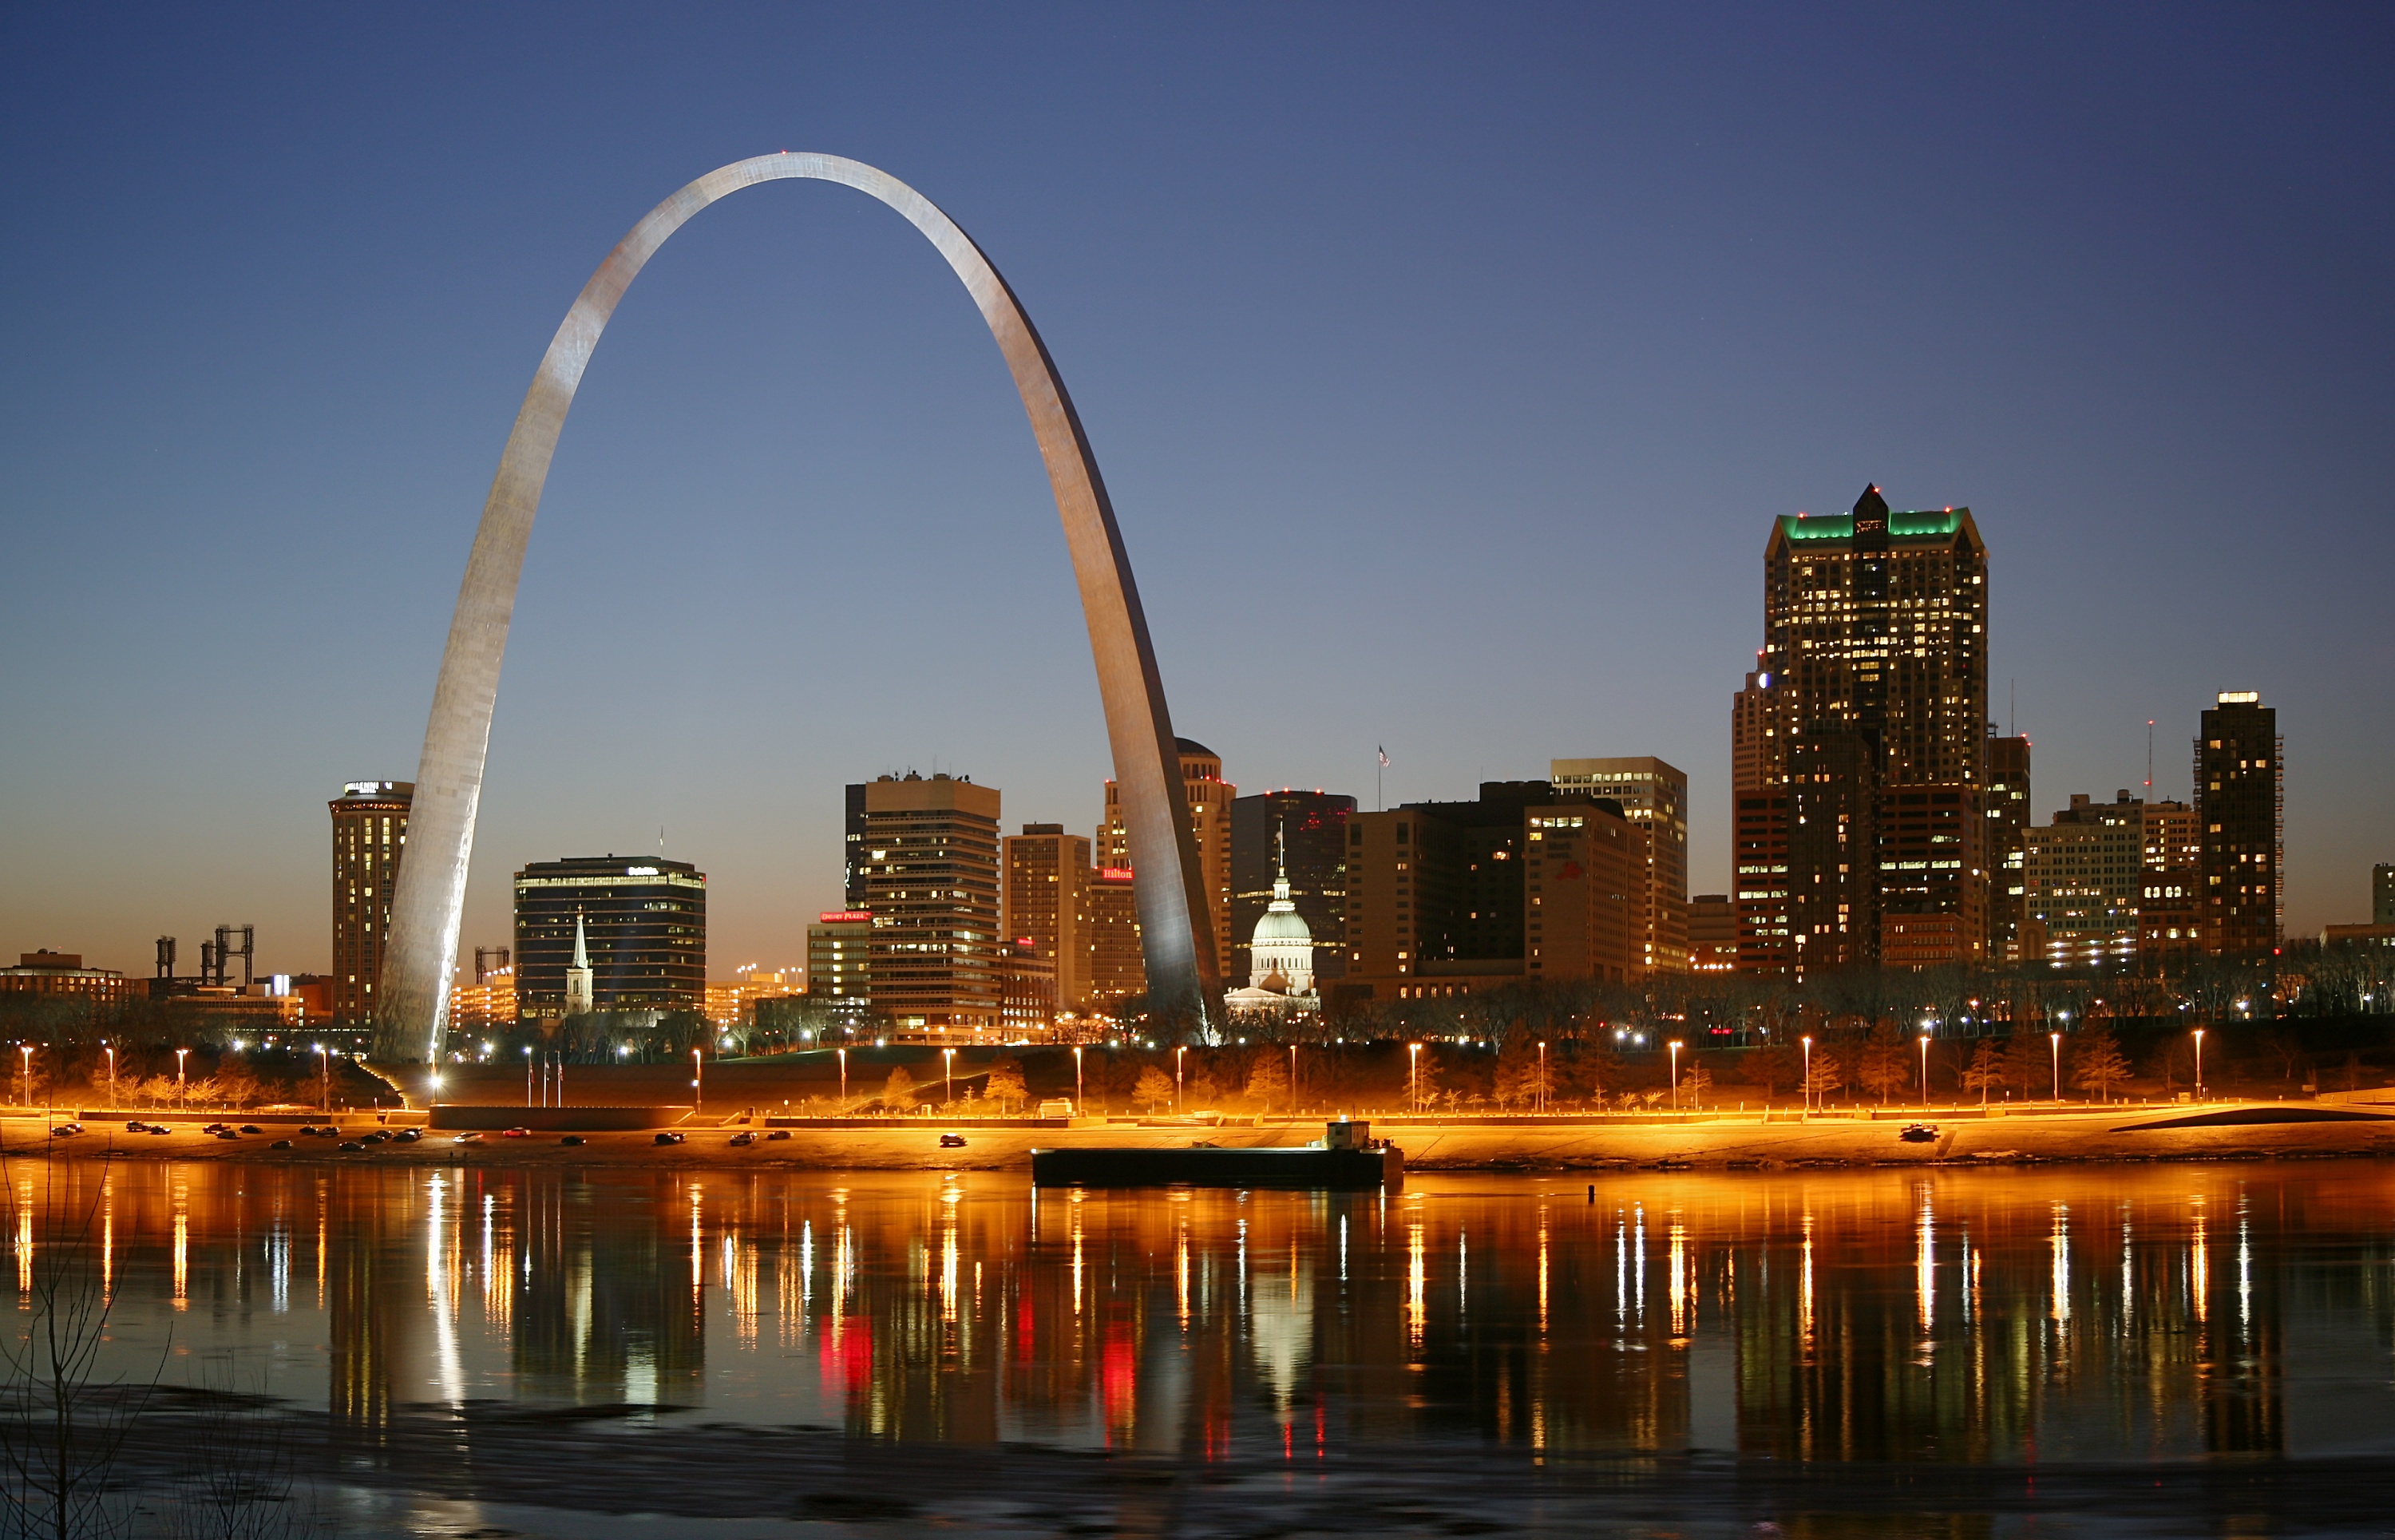 The gateway arch in st louis is lit up at night.